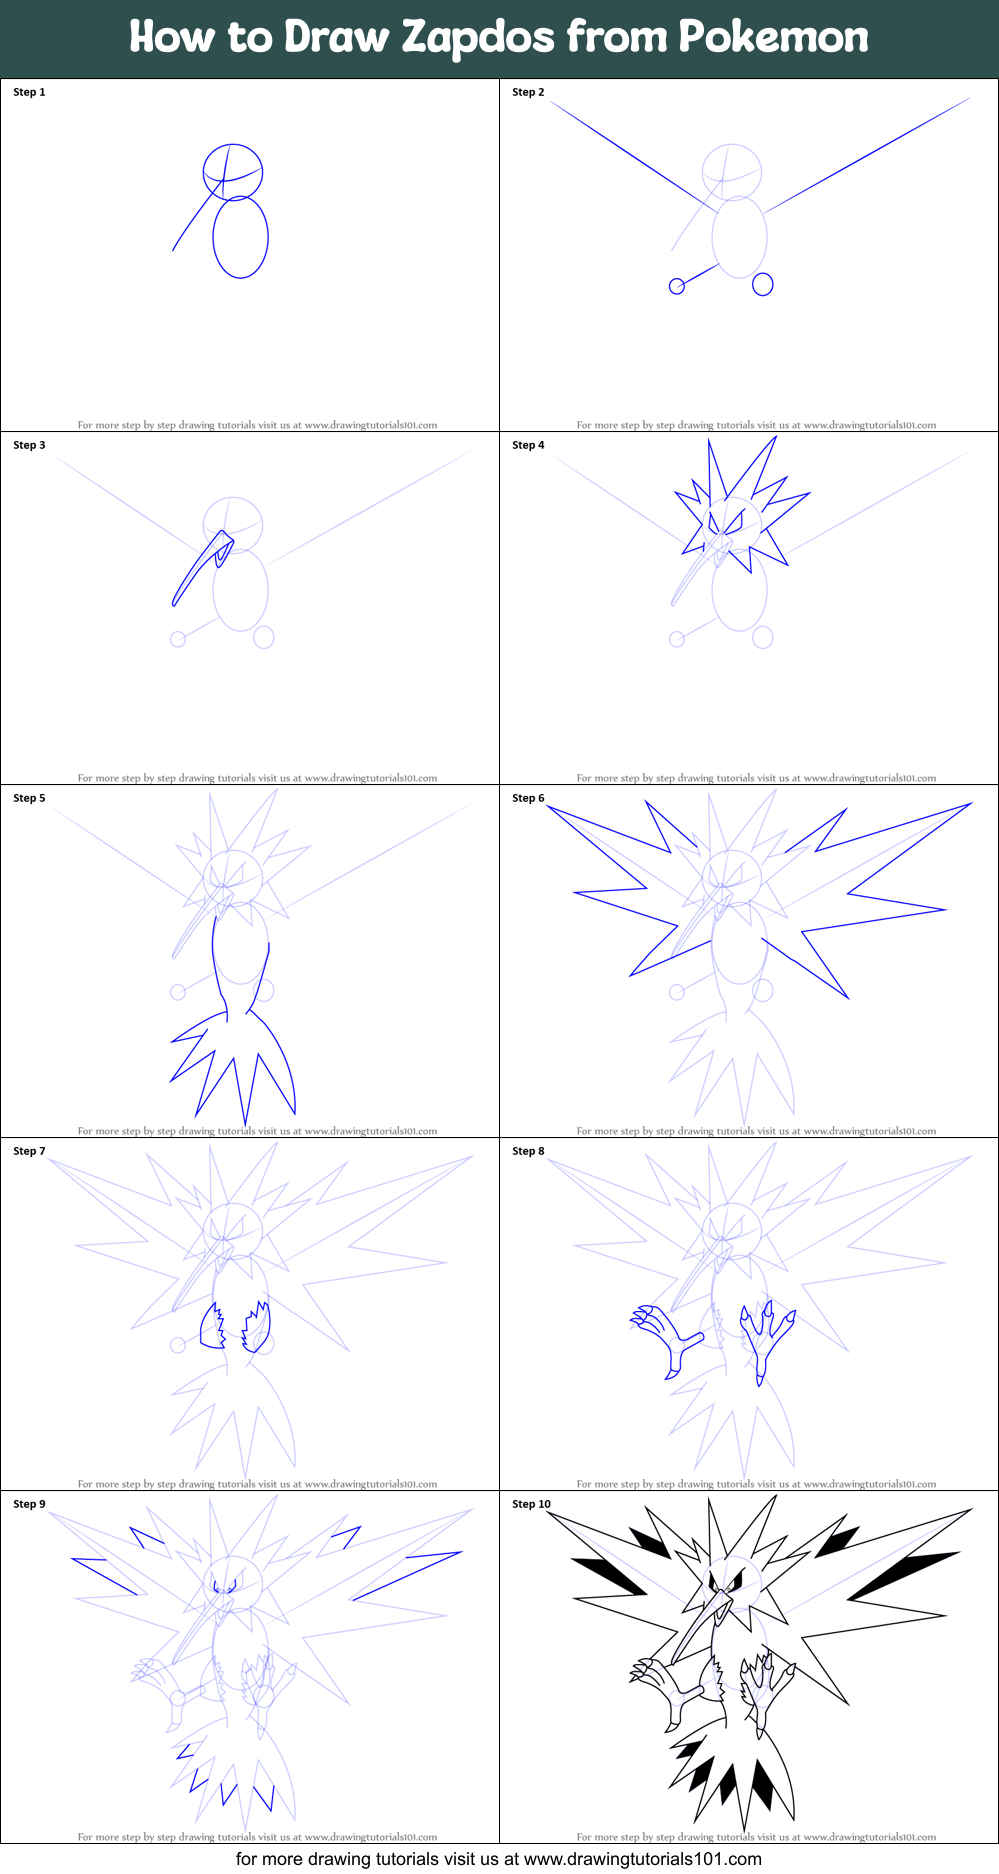 Ære klinge influenza How to Draw Zapdos from Pokemon printable step by step drawing sheet :  DrawingTutorials101.com